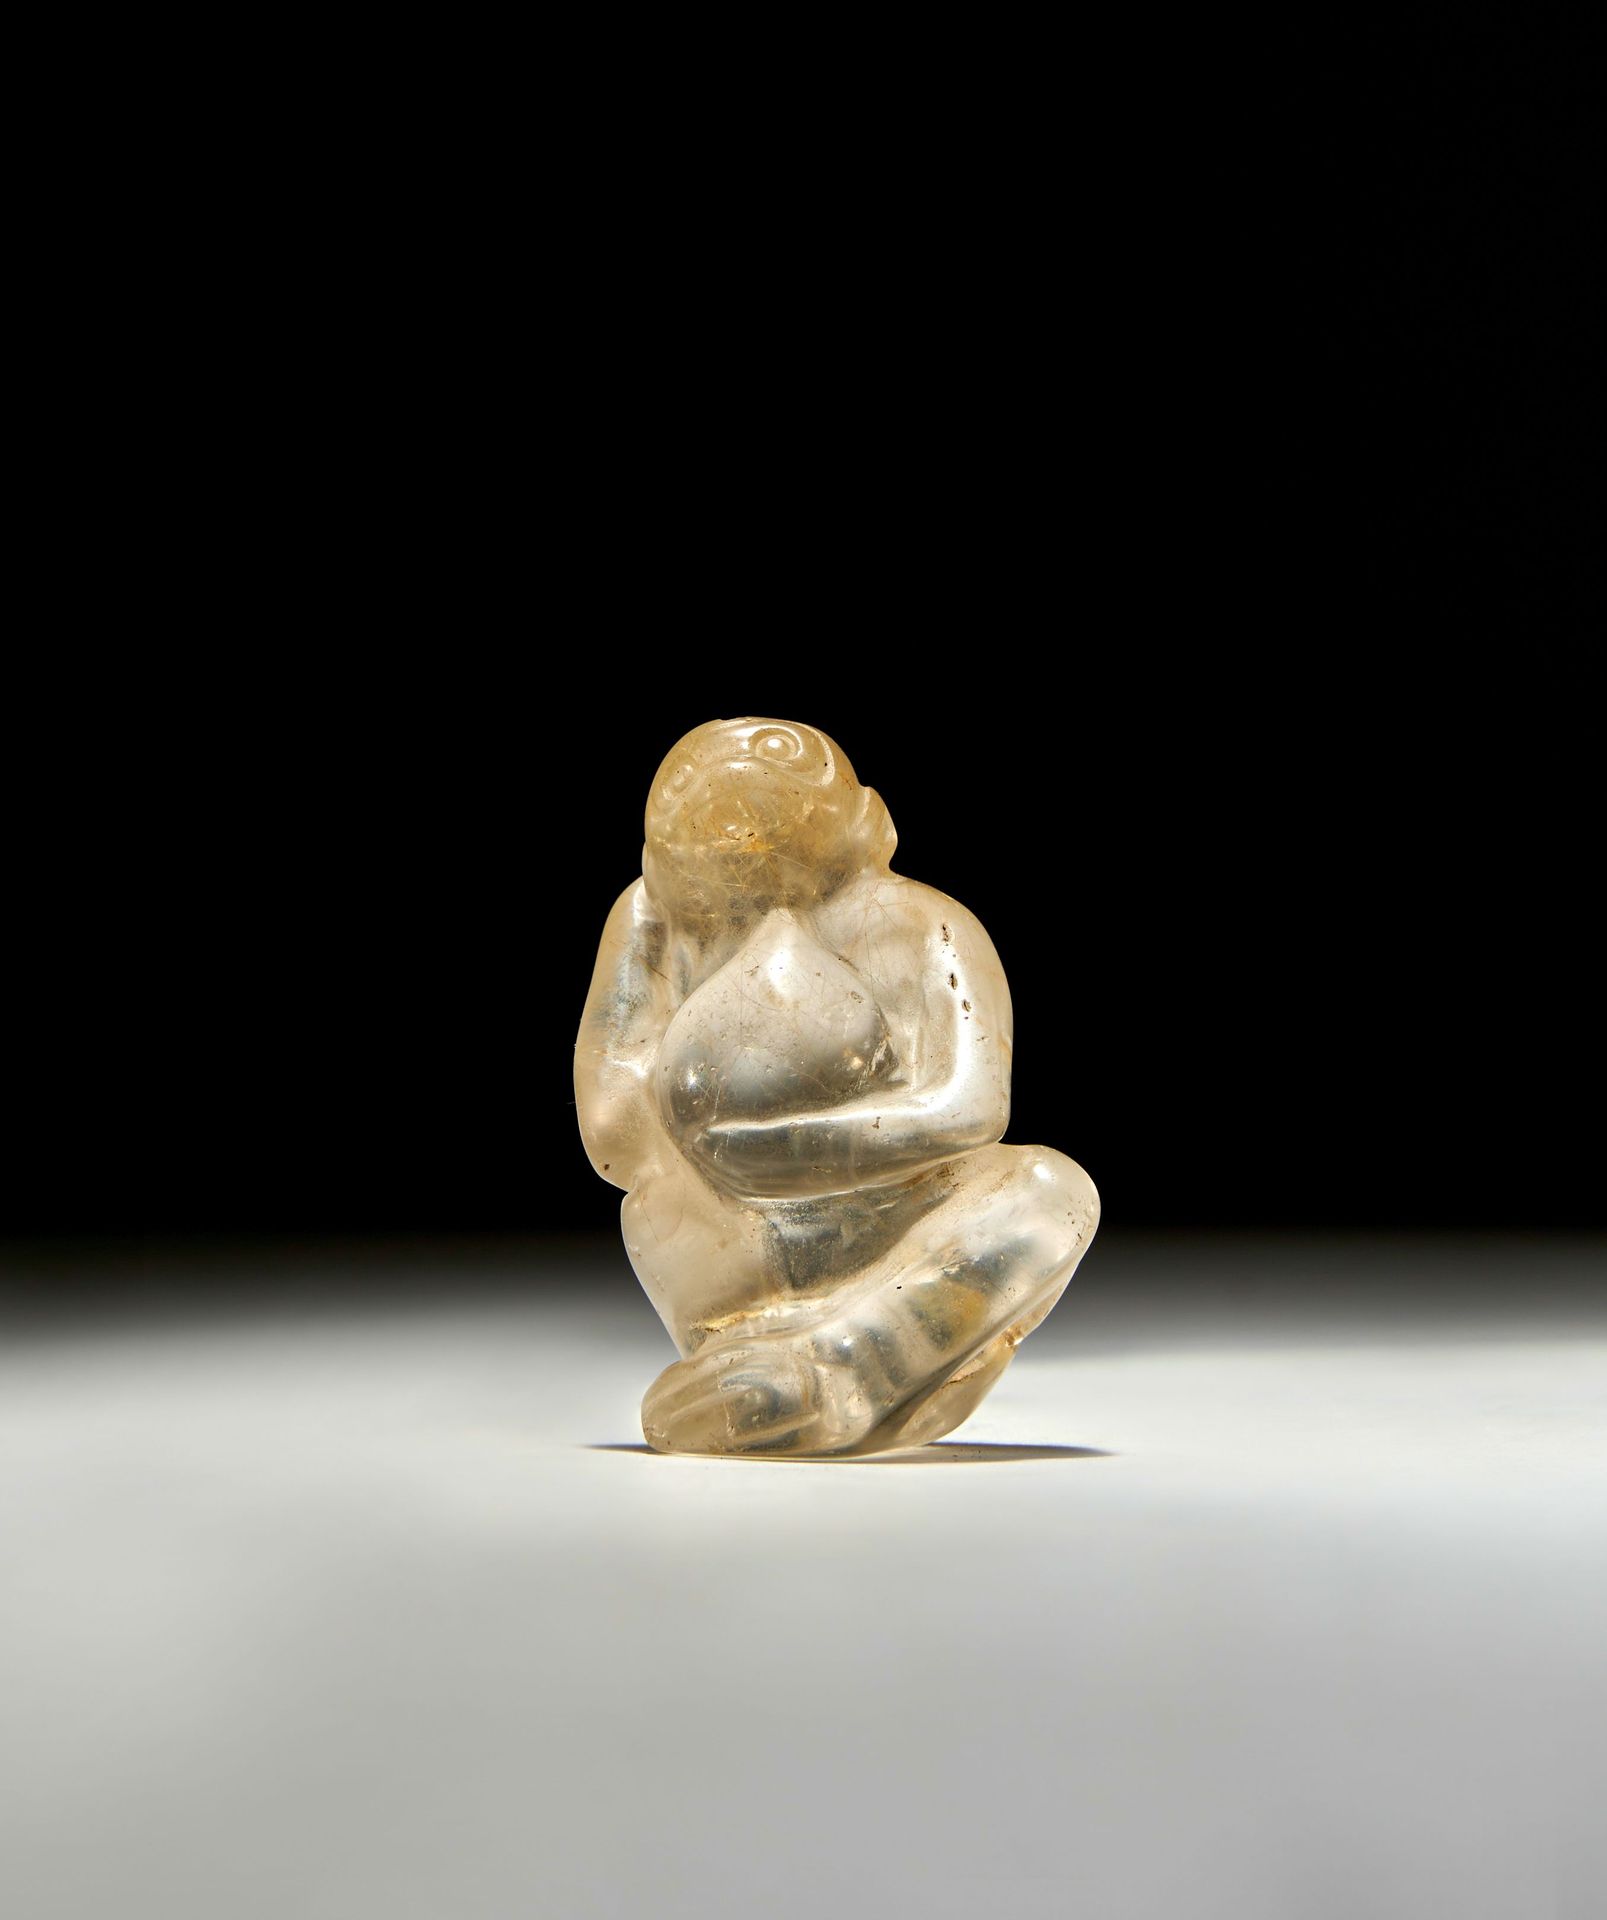 A BACTRIAN ROCK CRYSTAL FIGURINE OF A SEATED MONKEY, CIRCA 2ND MILLENIUM B.C. A &hellip;